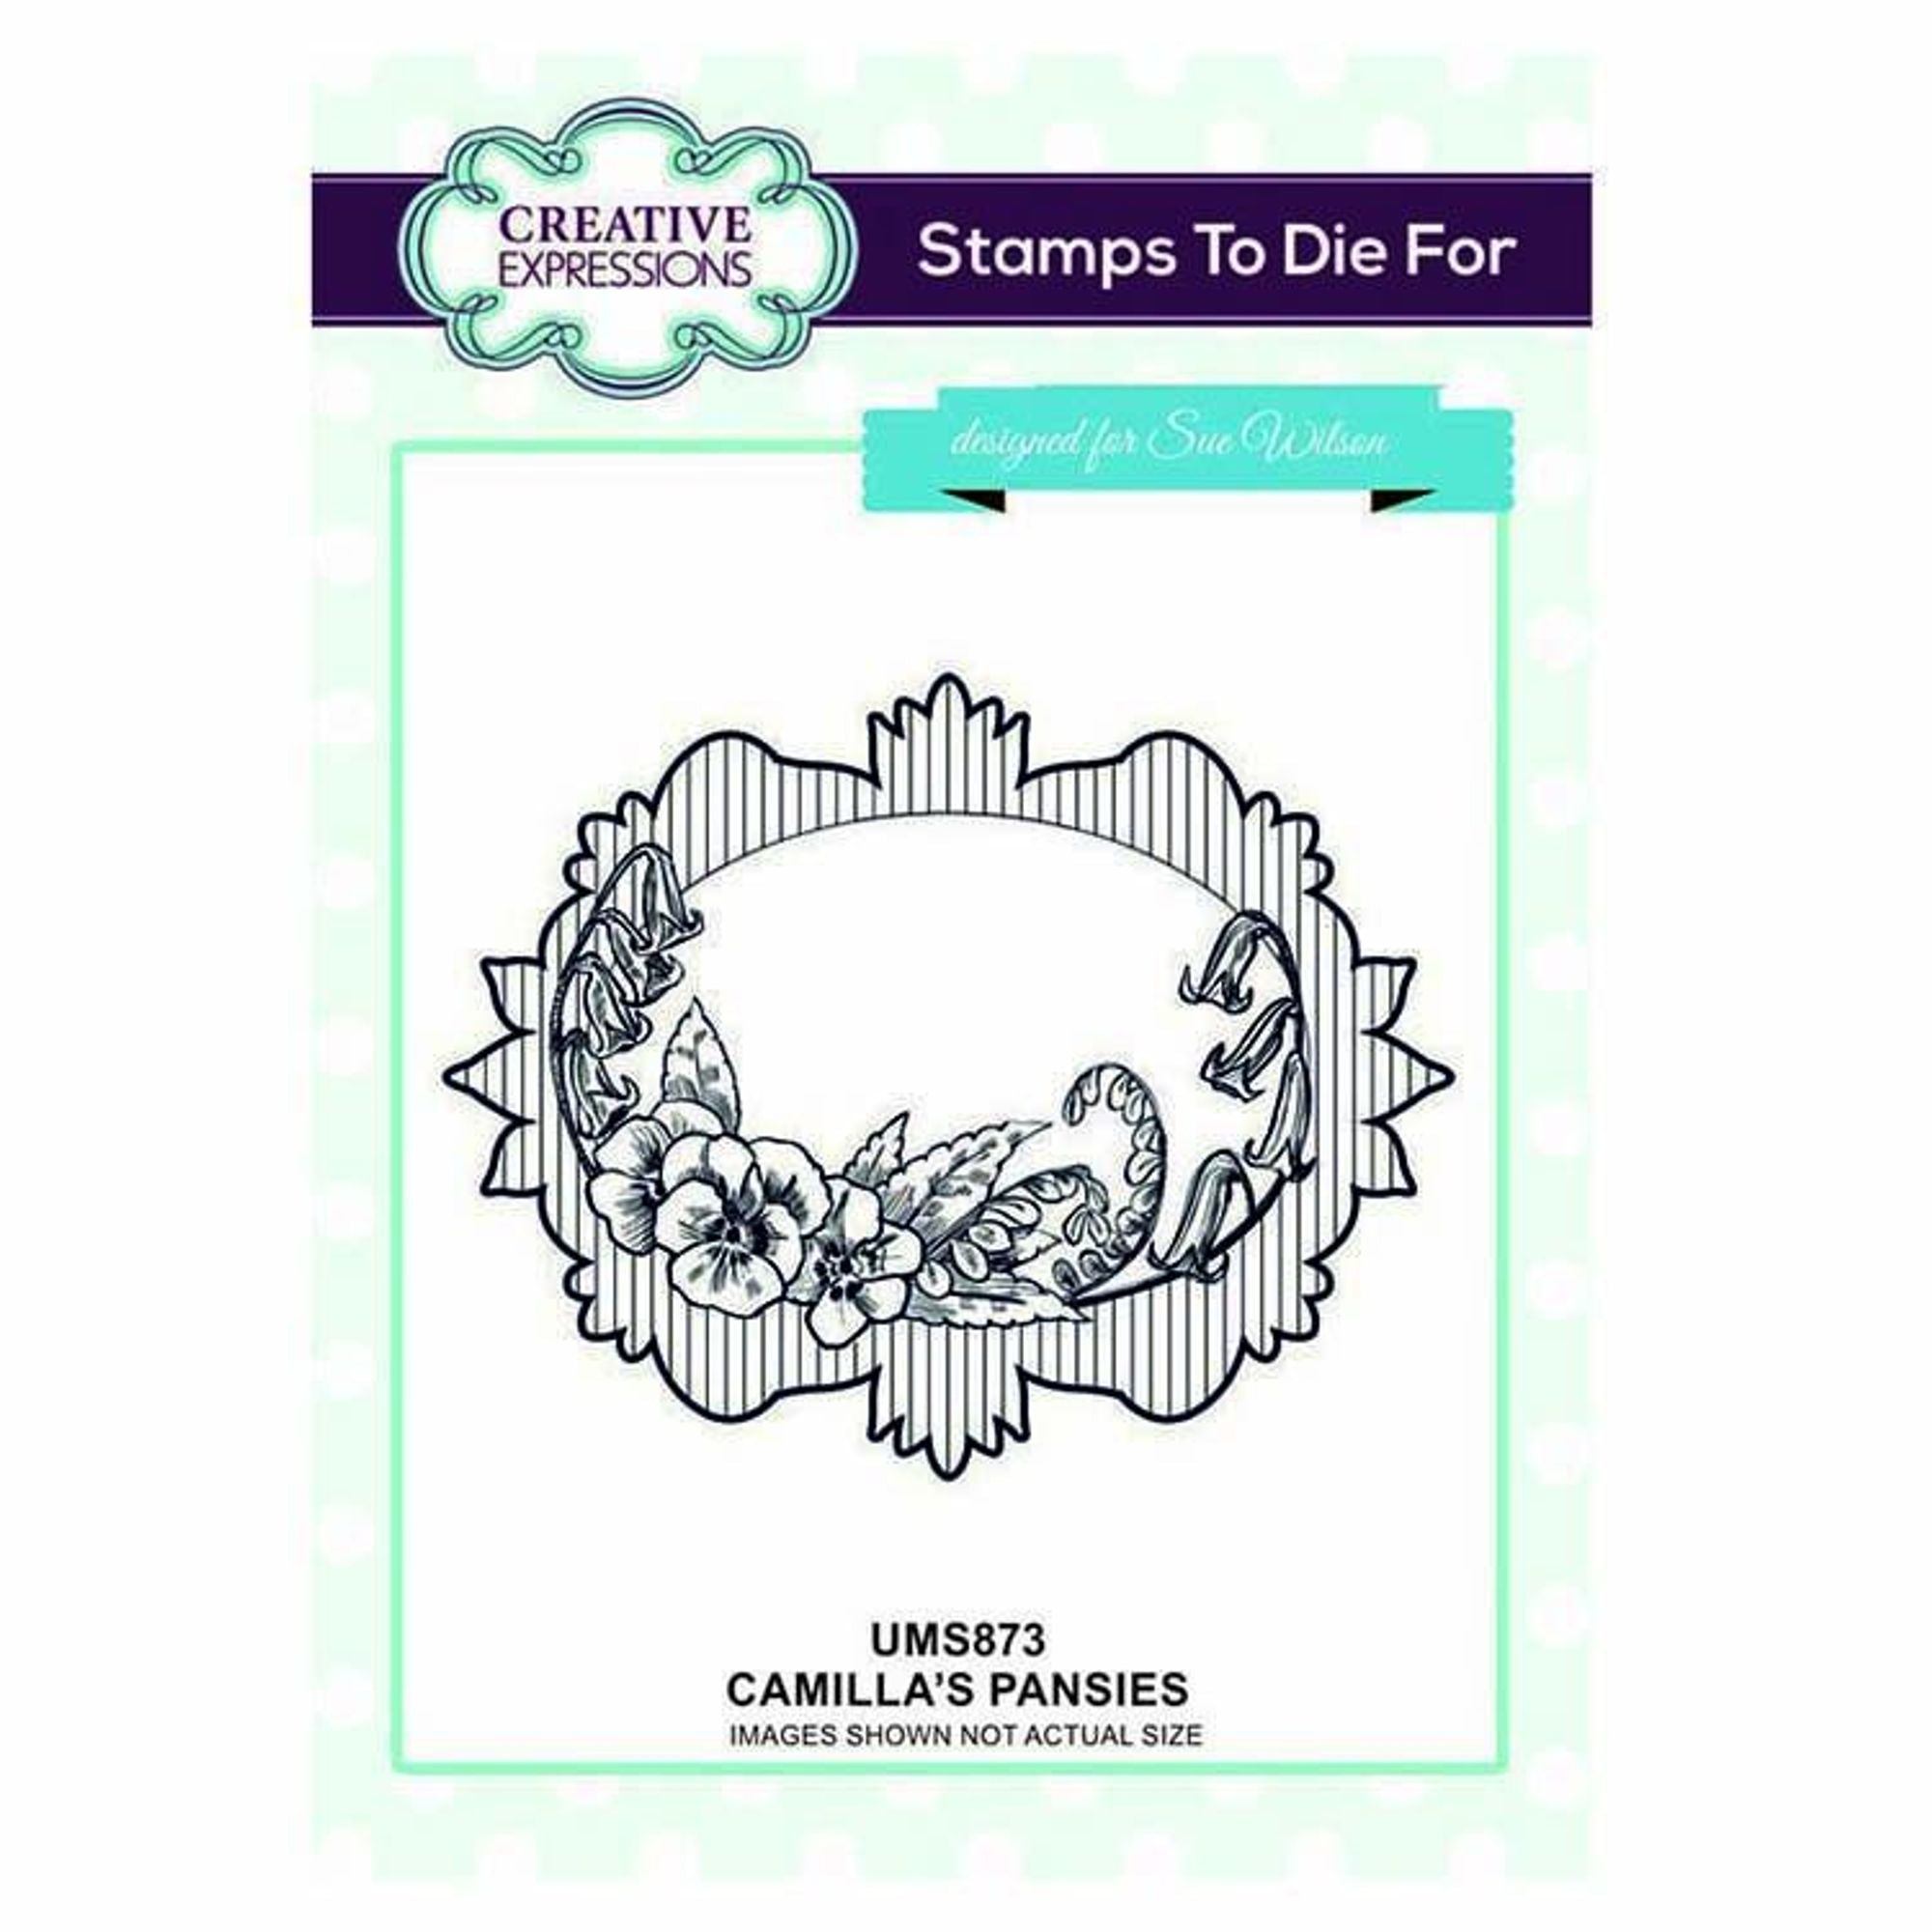 Creative Expressions Stamps To Die For Camilla's Pansies Pre Cut Stamp